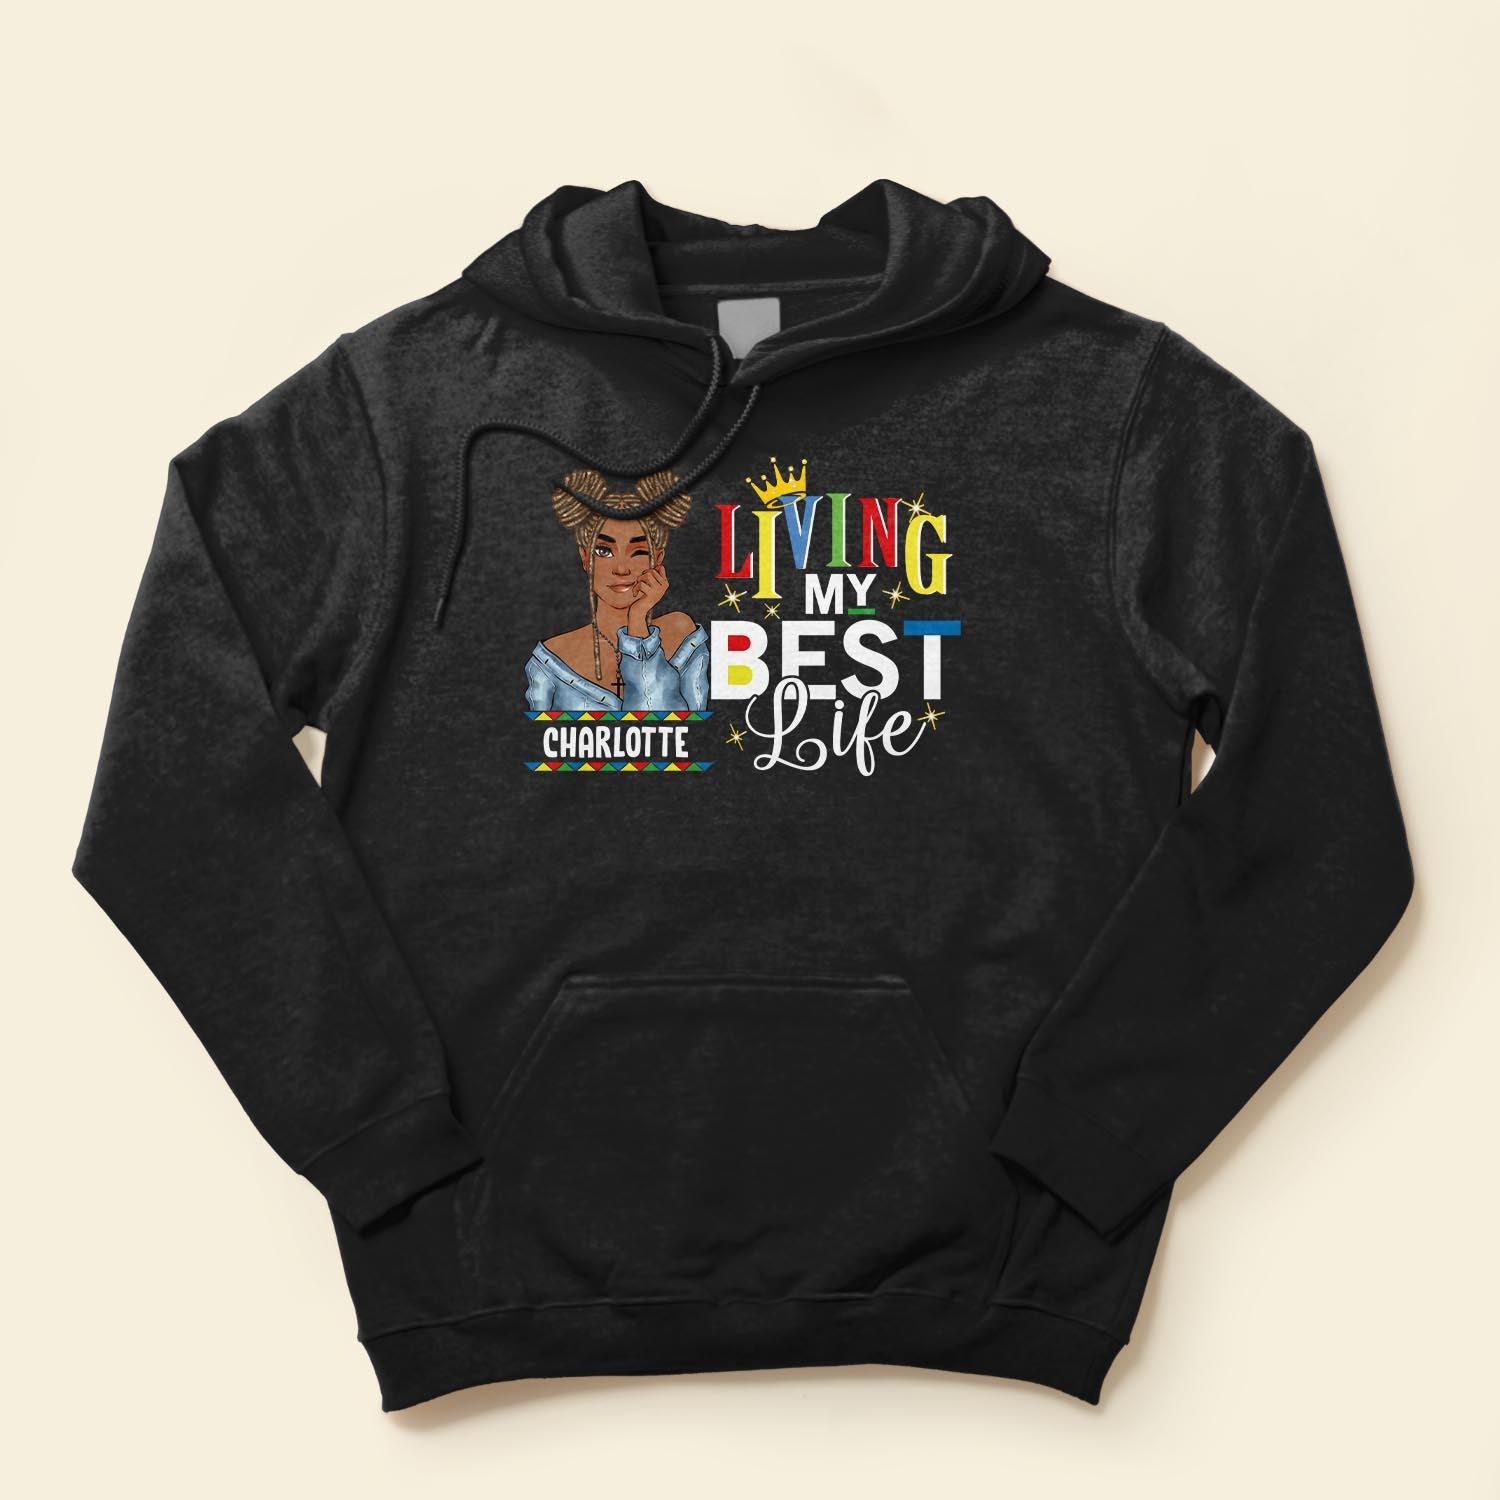 Living My Best Life - Personalized Shirt - Birthday Gift For Black Woman 